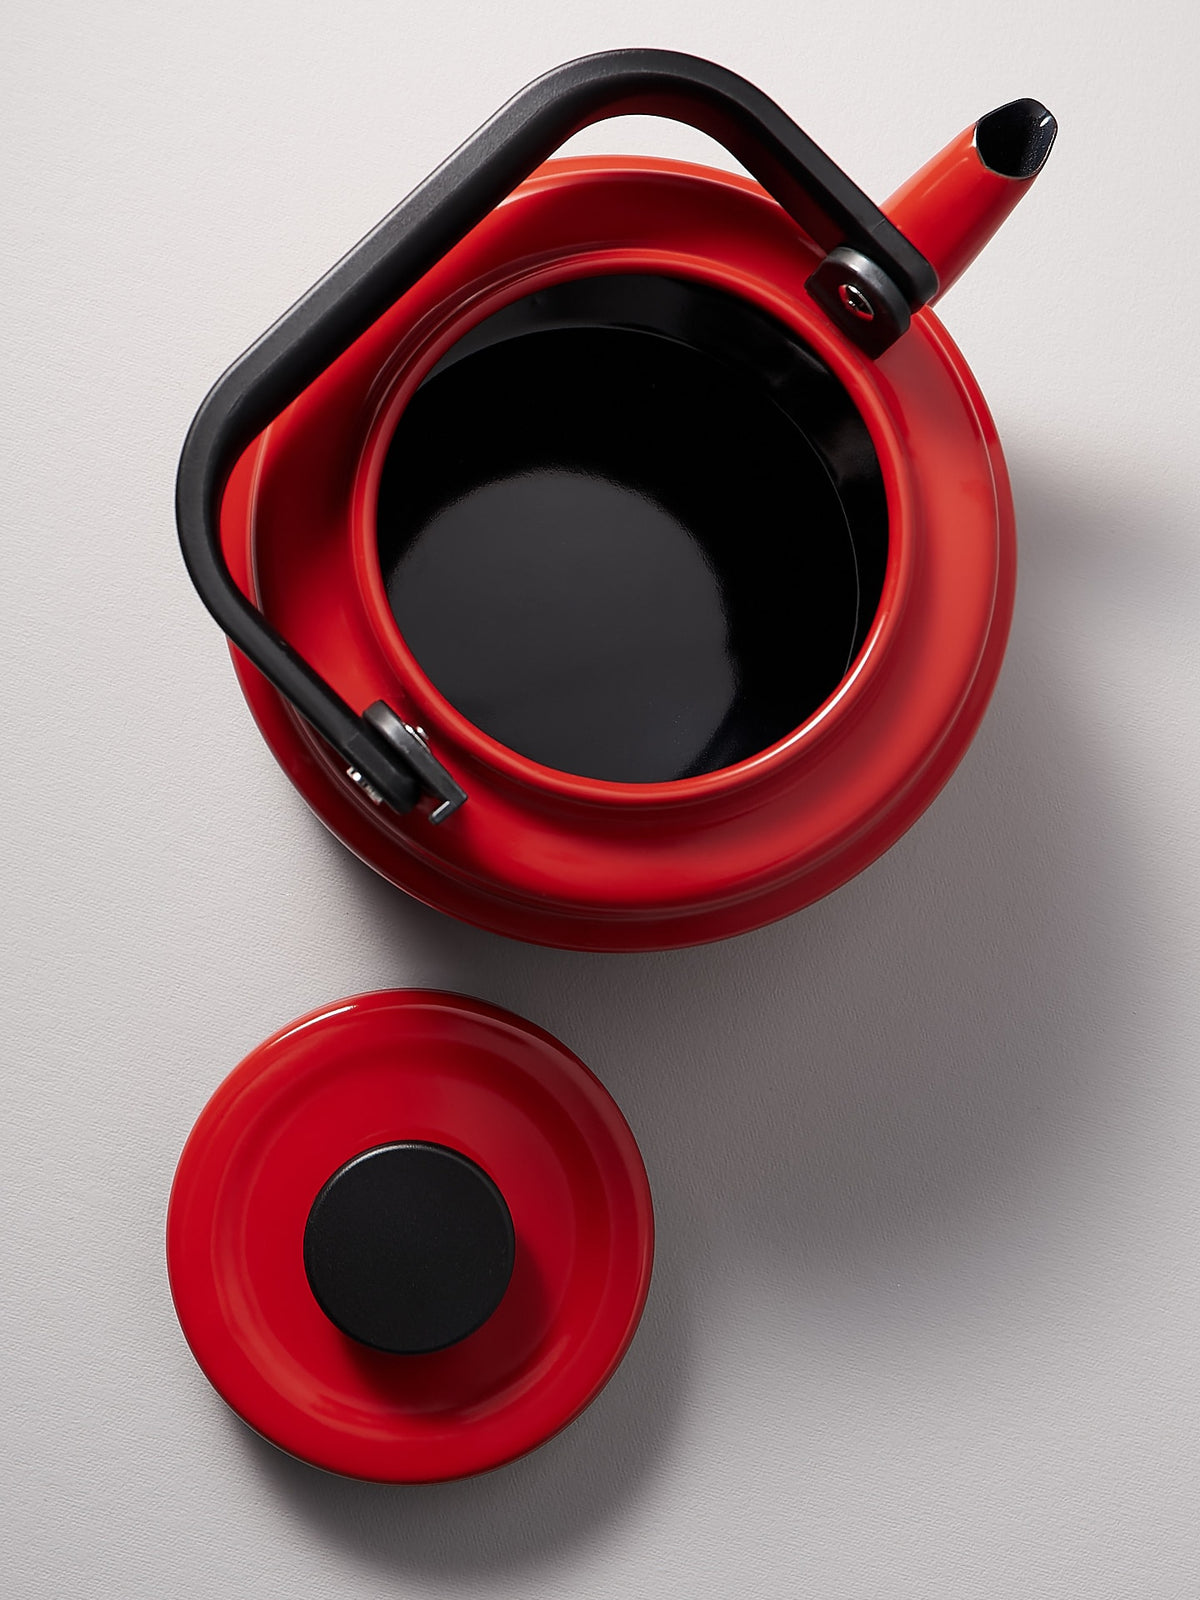 An Amu Stove-top Kettle - Red with a black lid on a white surface.